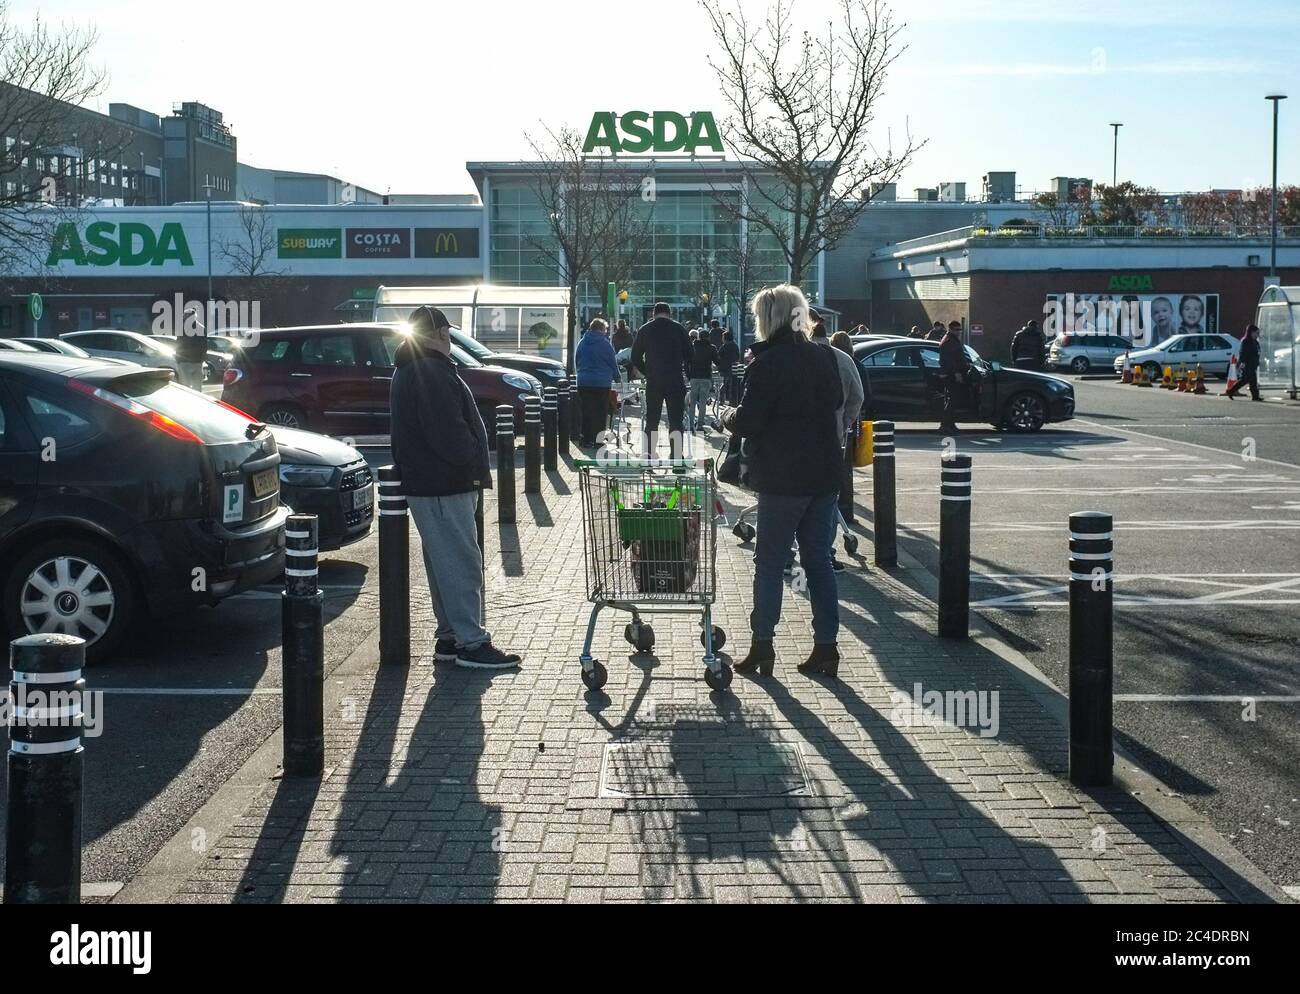 early morning queue at ASDA supermarket during the covid-19 coronavirus pandemic outbreak. 26th march 2020 Stock Photo